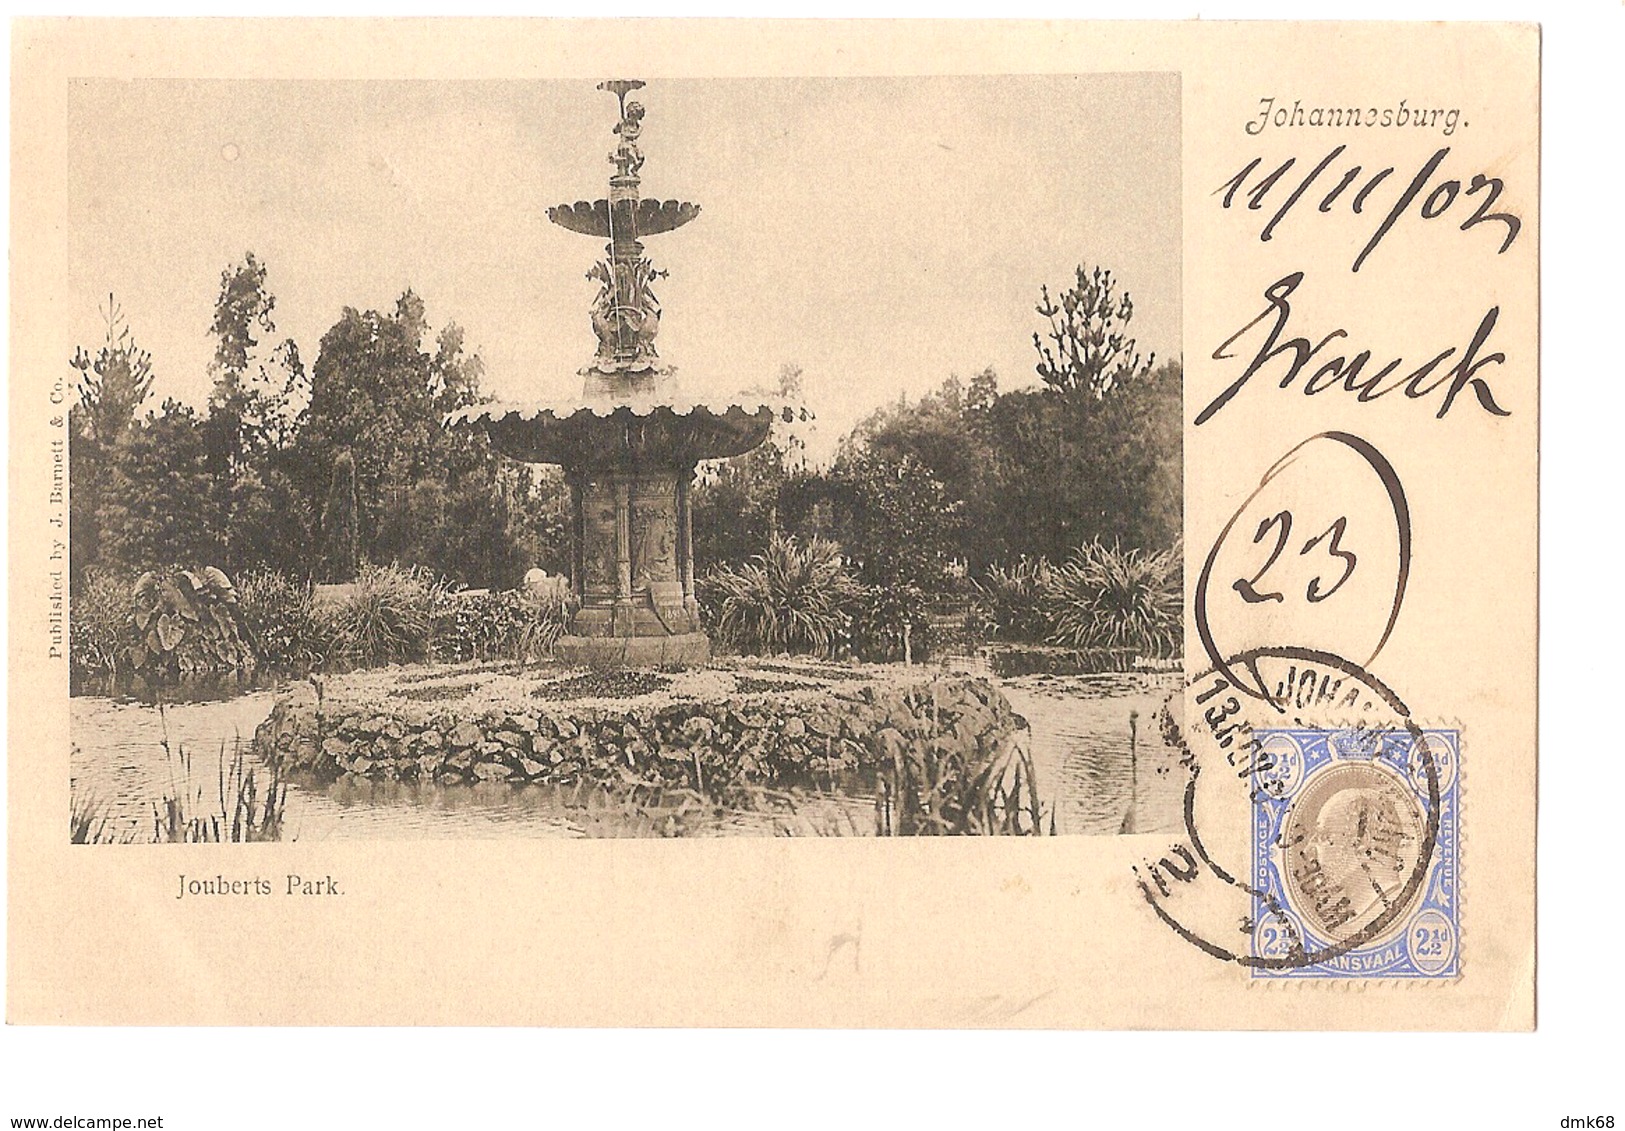 SOUTH AFRICA - JOHANNESBURG - JOUBERTS PARK - STAMP - MAILED TO NOCERA INFERIORE - EDIT BARNETT 1902 (2790) - South Africa